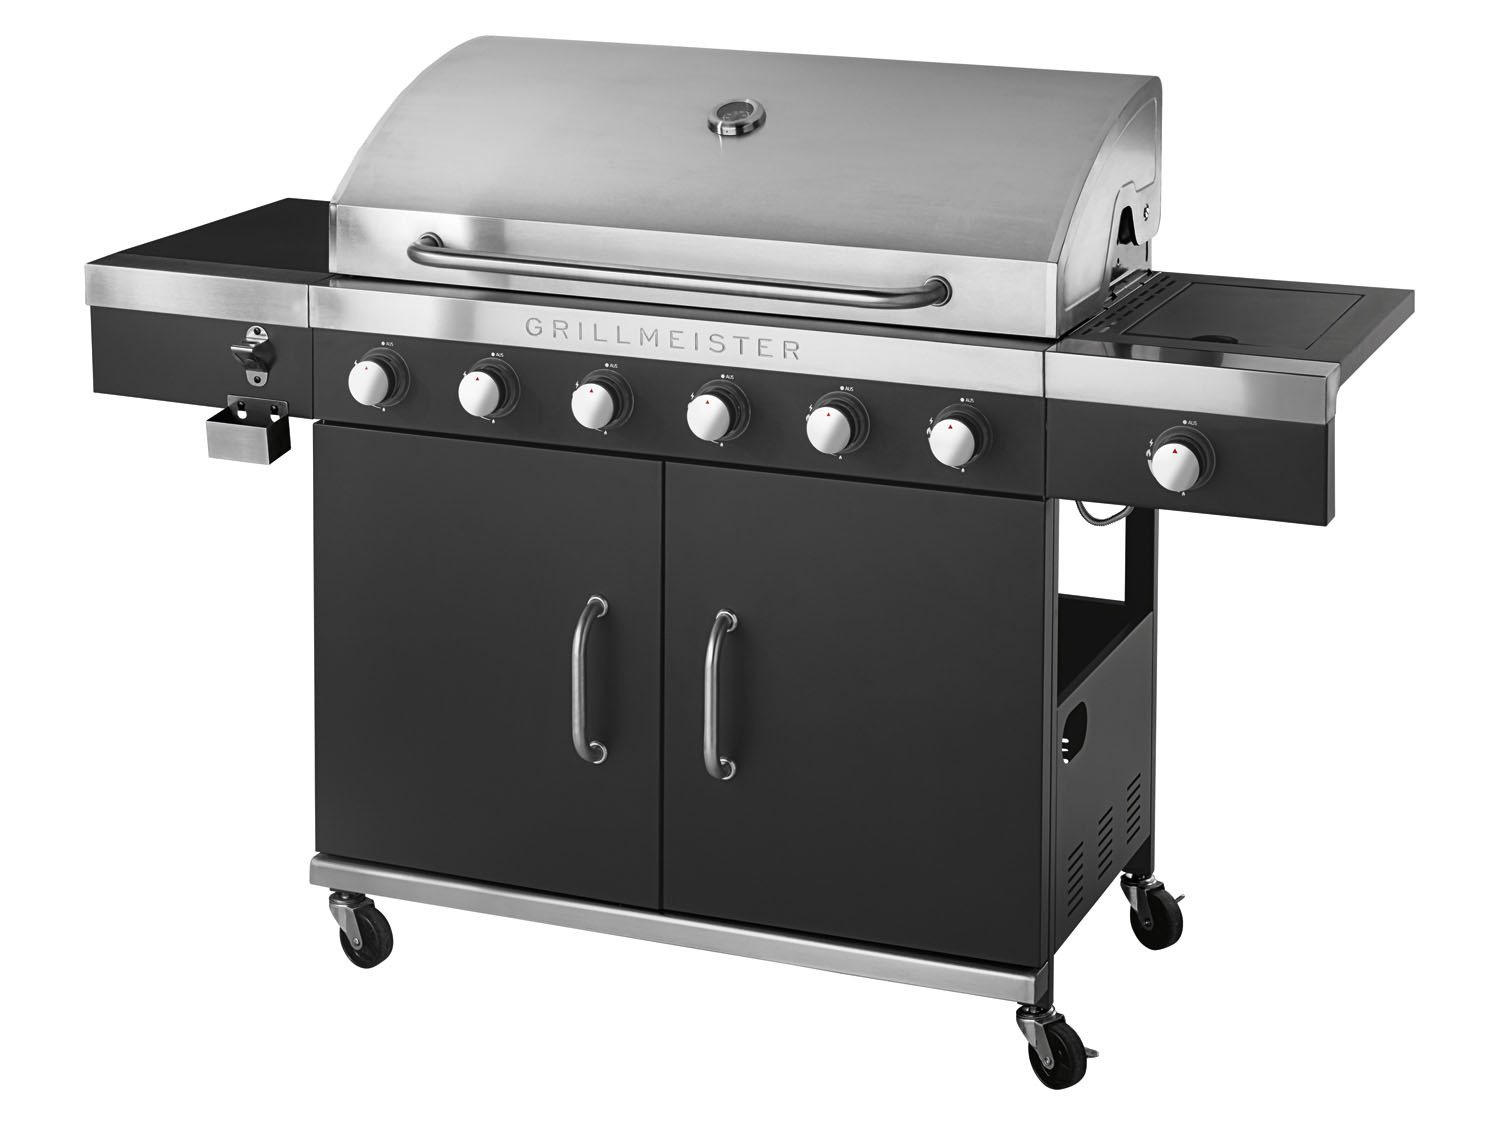 GRILLMEISTER Gasgrill, 6plus1 Brenner, 26,1 kW LIDL 